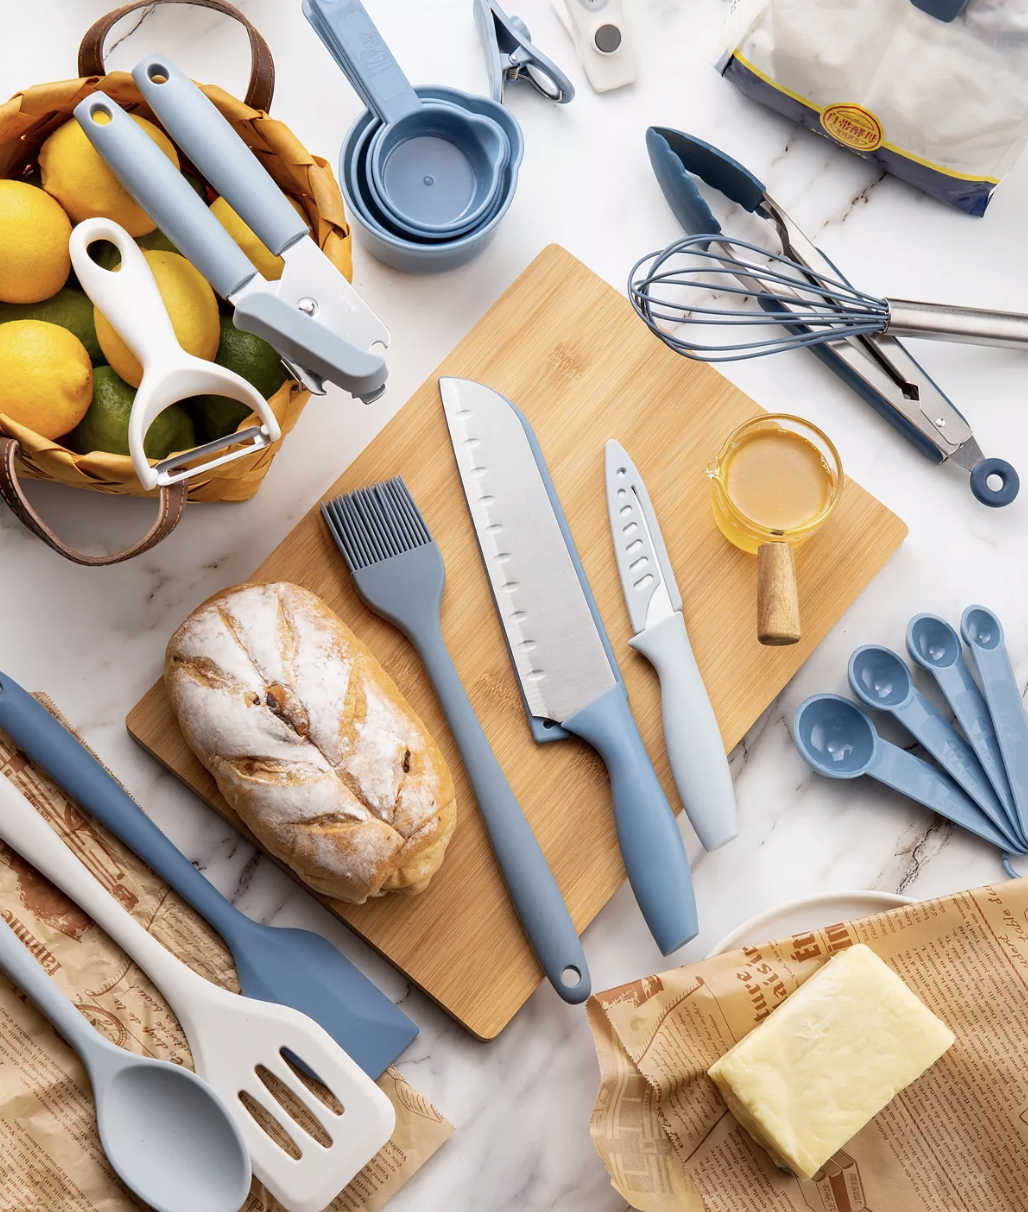 Macy's  Cook With Color 24-Pc. Essential Kitchen Gadget Set Only $14.99  (Reg. $58)